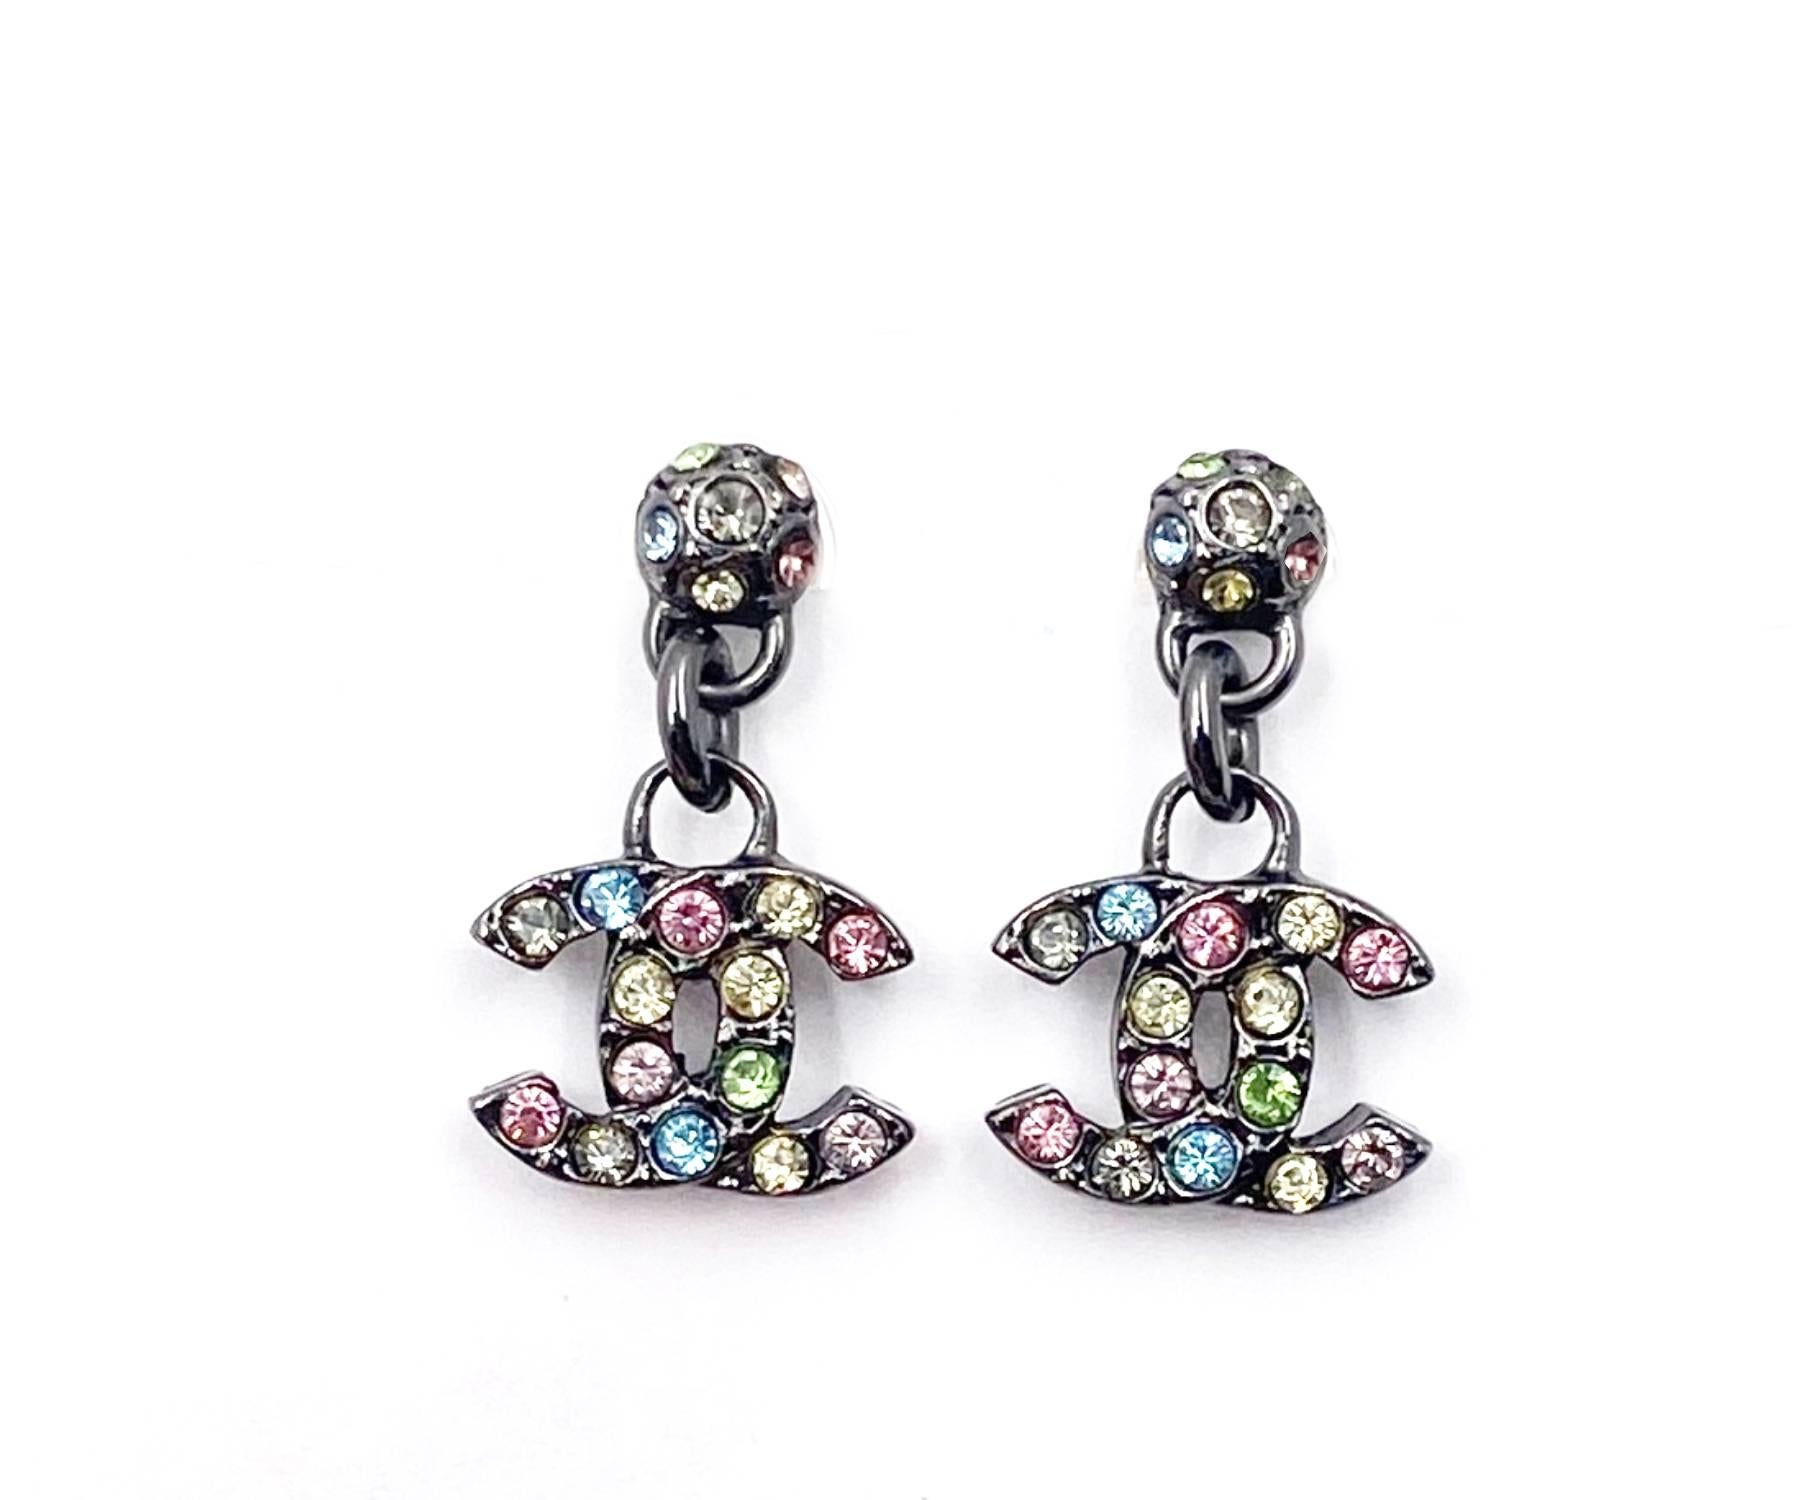 Chanel Gunmetal Rainbow Crystal CC Dangle Piercing Earrings

*Marked 05
*Made in France

-Approximately 0.75